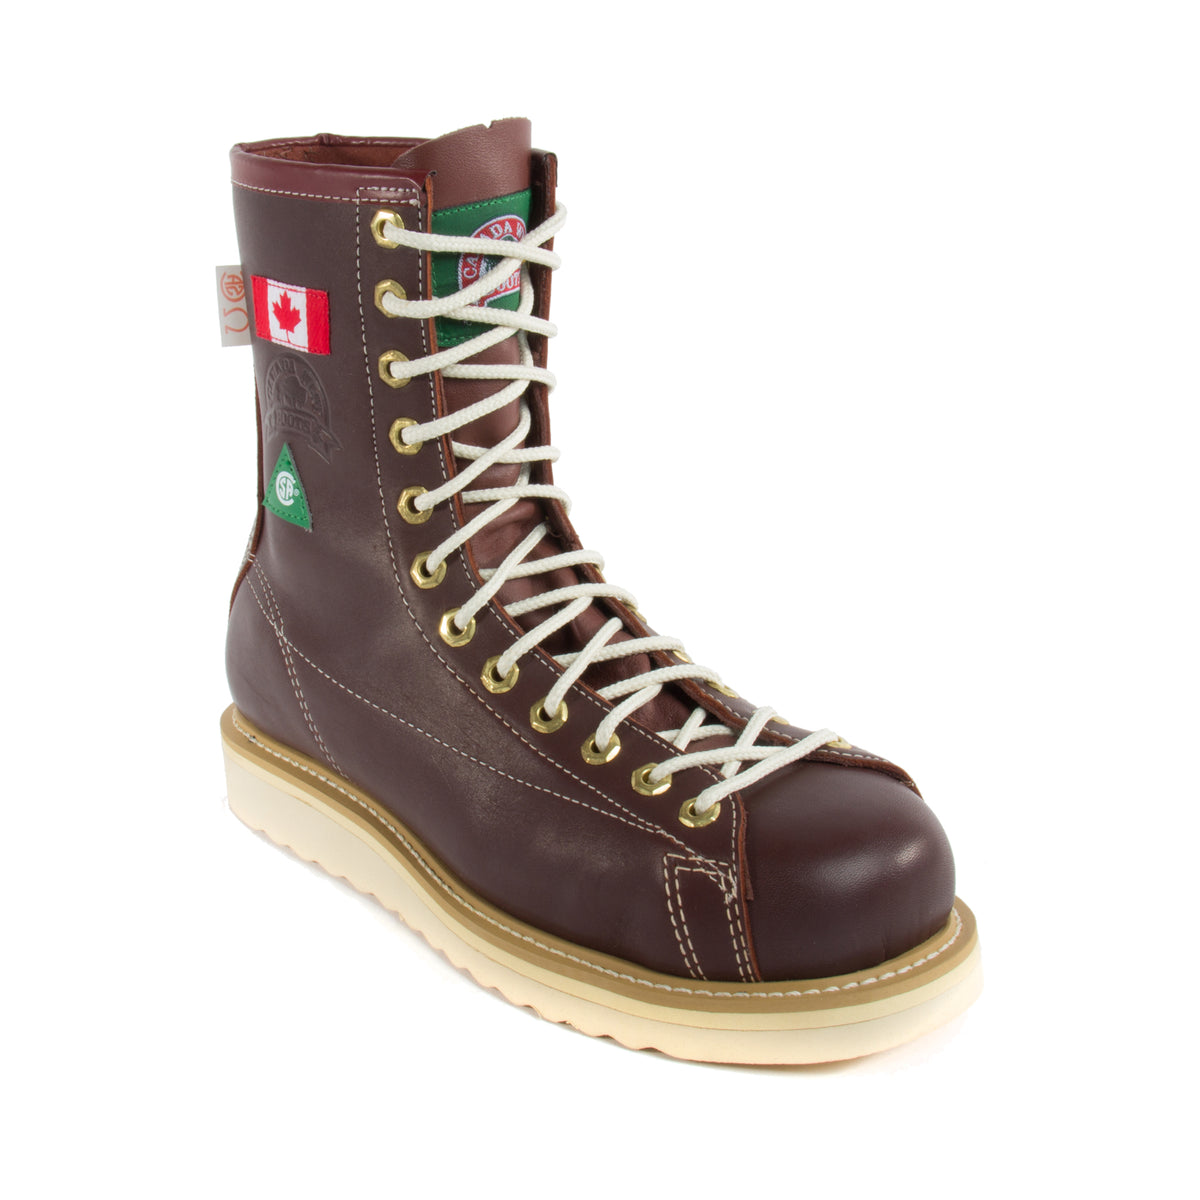 canada west lineman boots